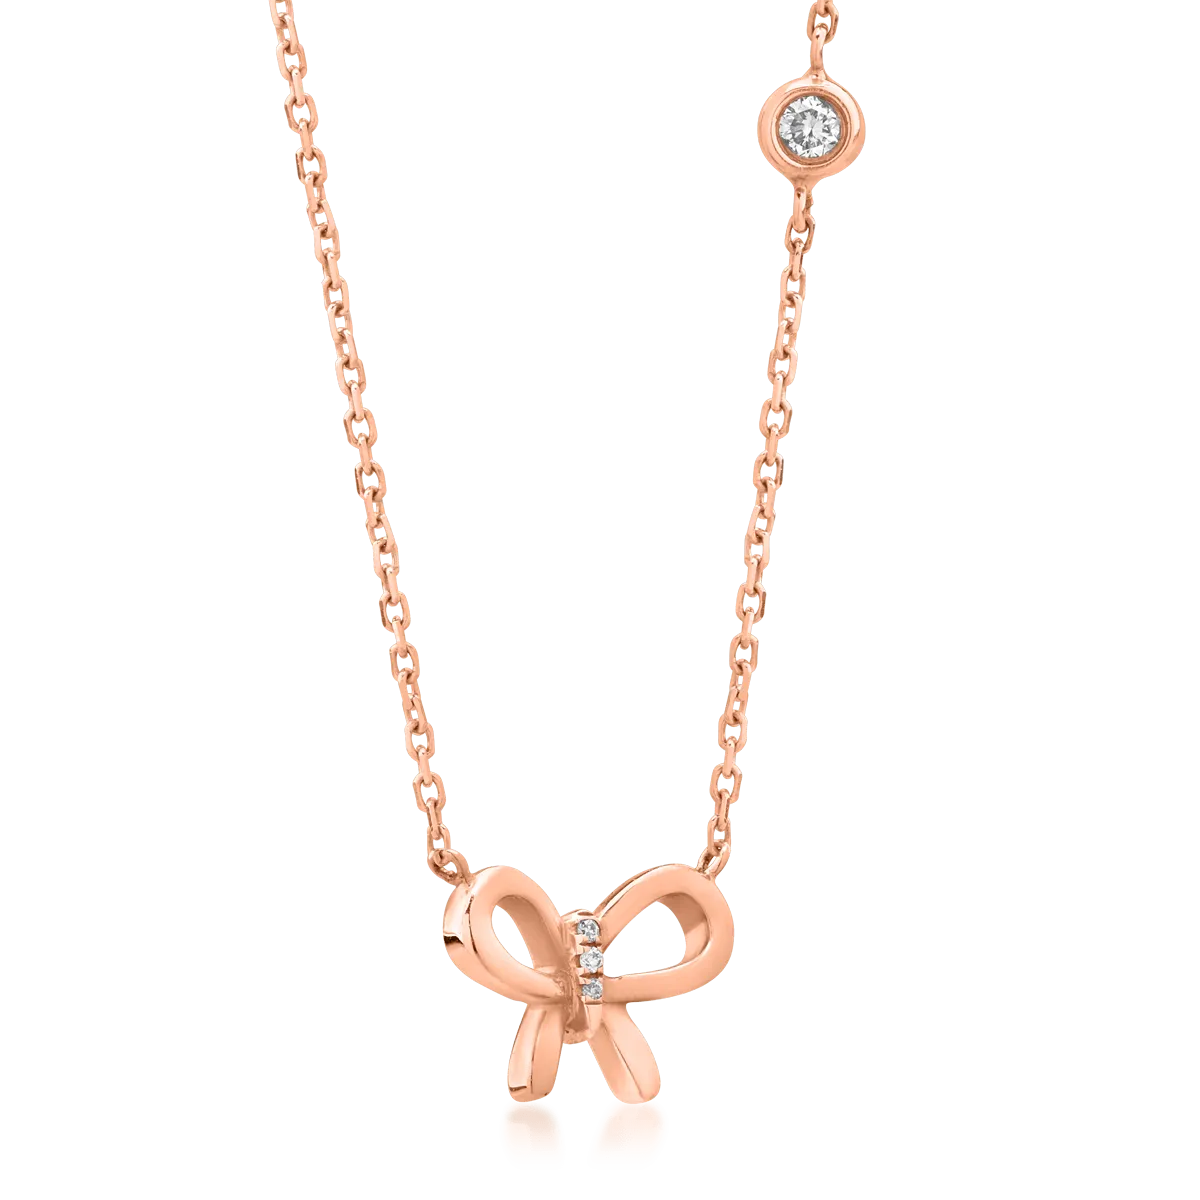 18K rose gold knot pendant chain with 0.026ct diamond and 0.009ct diamonds